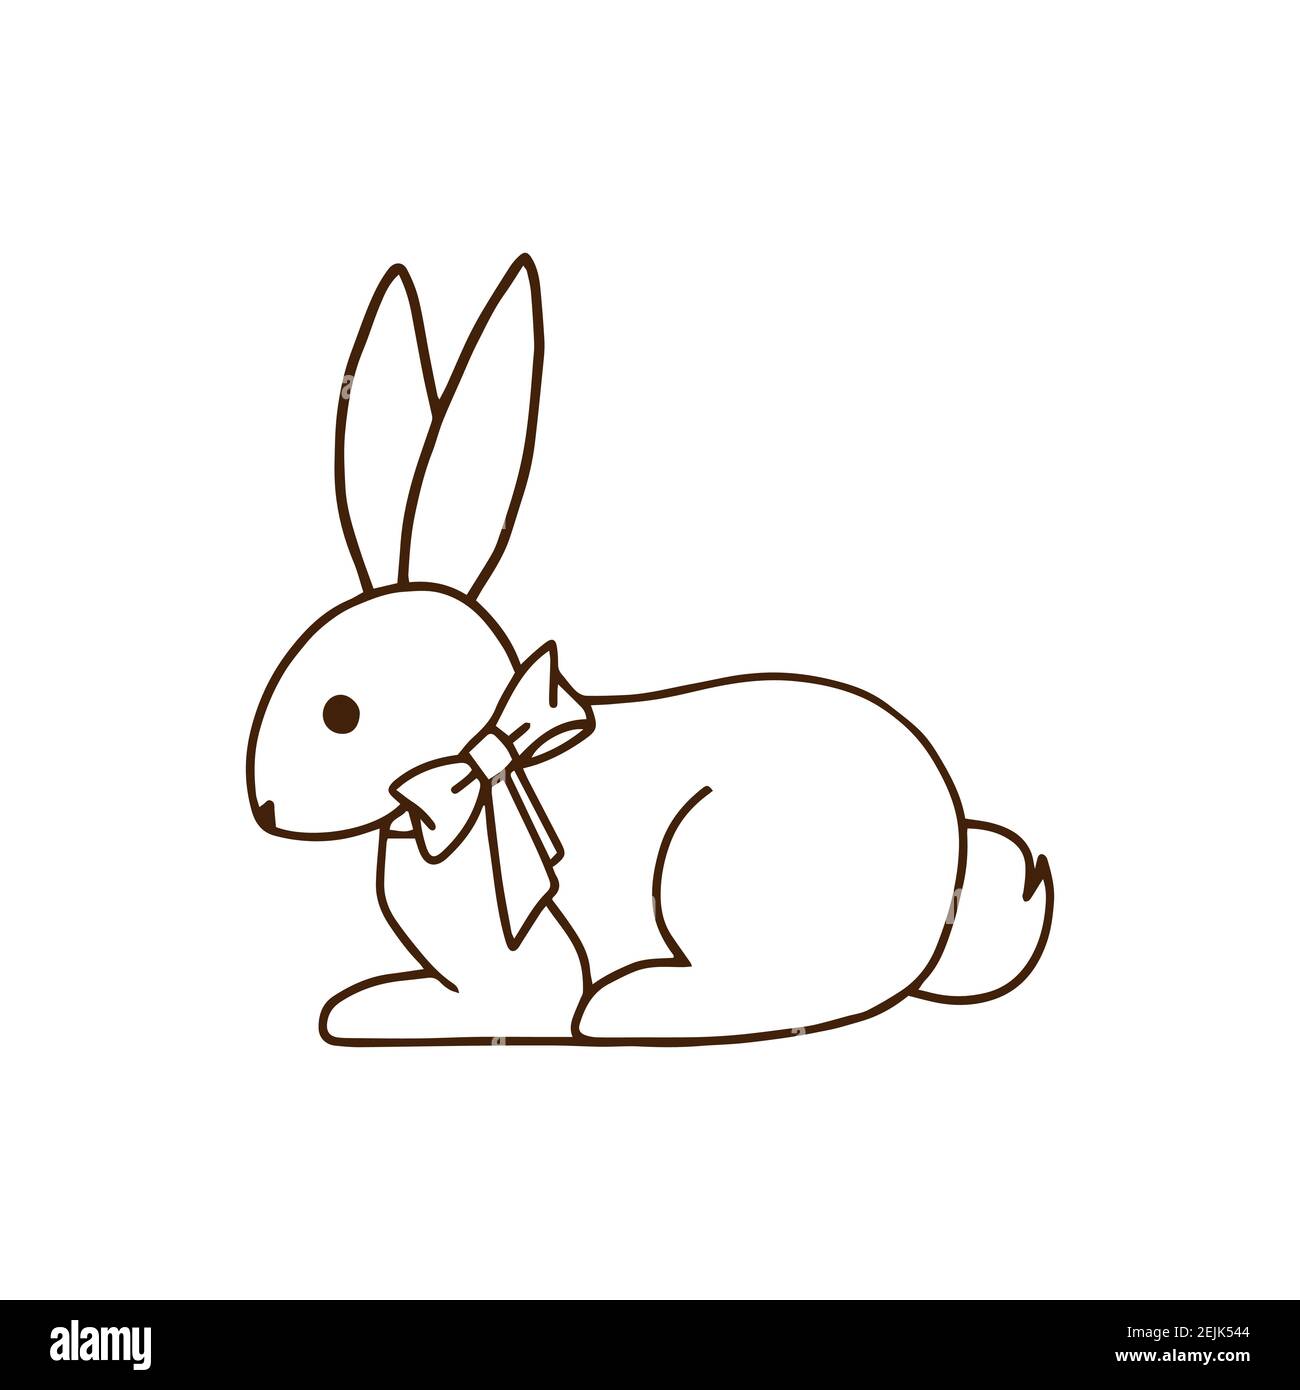 Bunny Drawing - How To Draw A Bunny Step By Step